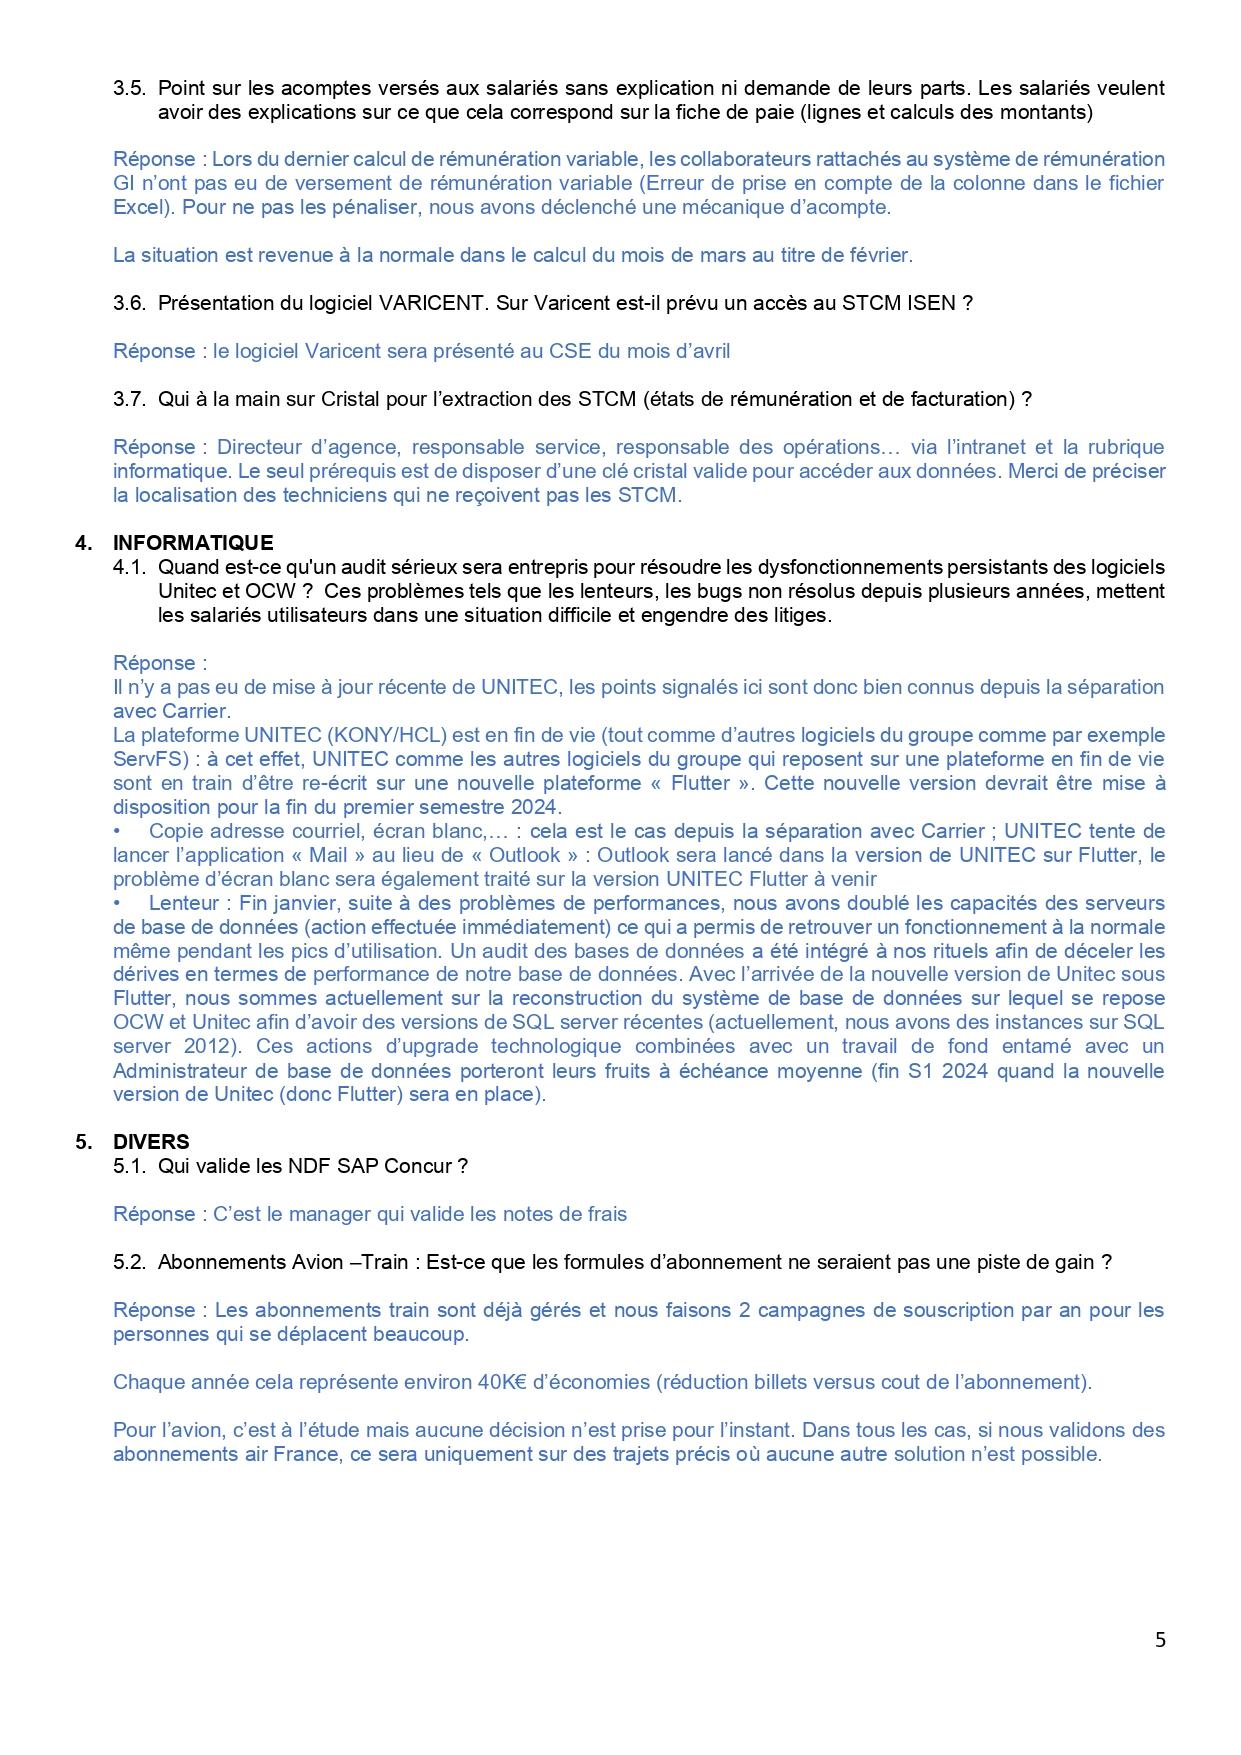 Reponses aux questions du cse 21 03 24 vdef pages to jpg 0005